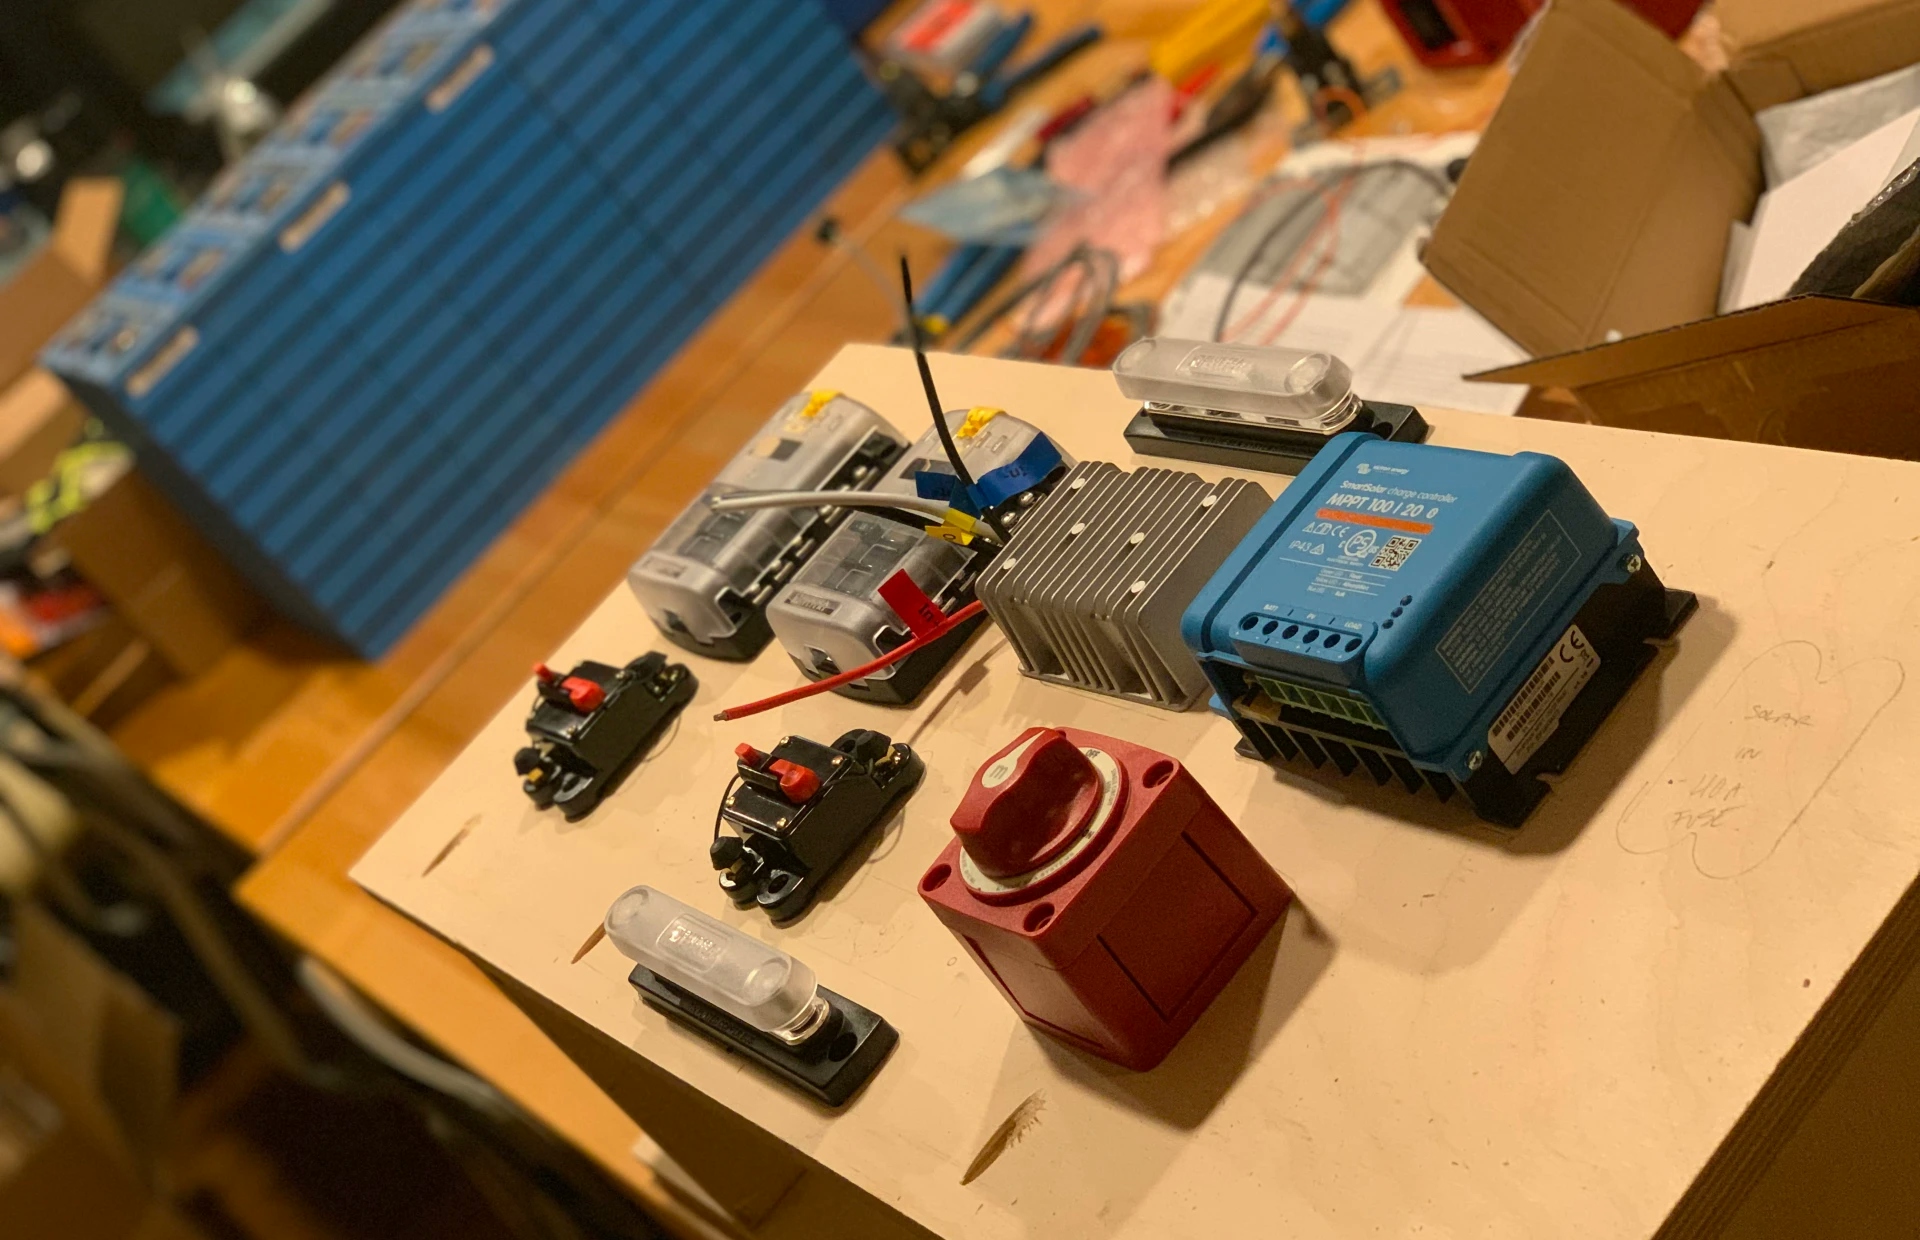 image of heavy duty DC electrical components laid out on kitchen table